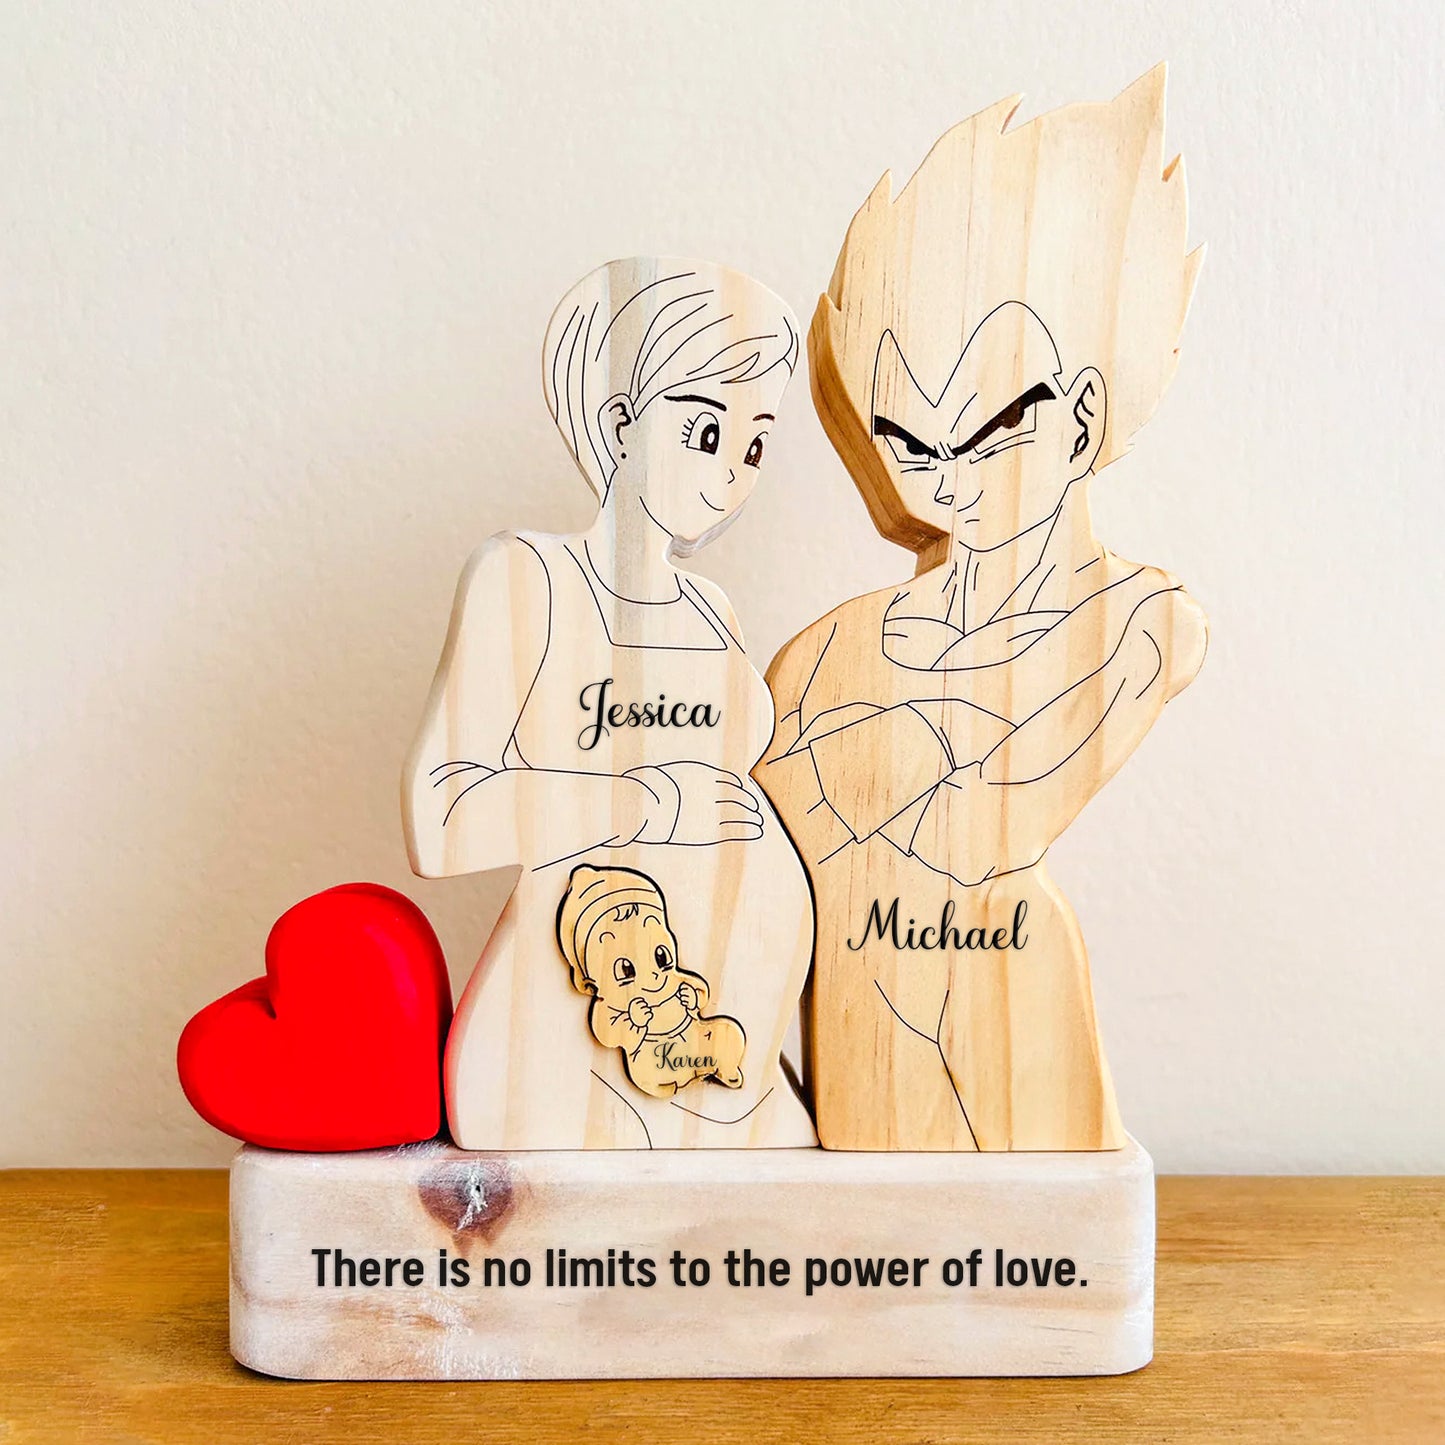 Family - Cute Cartoon Characters DBZ - Personalized Wooden Puzzle Ver 2